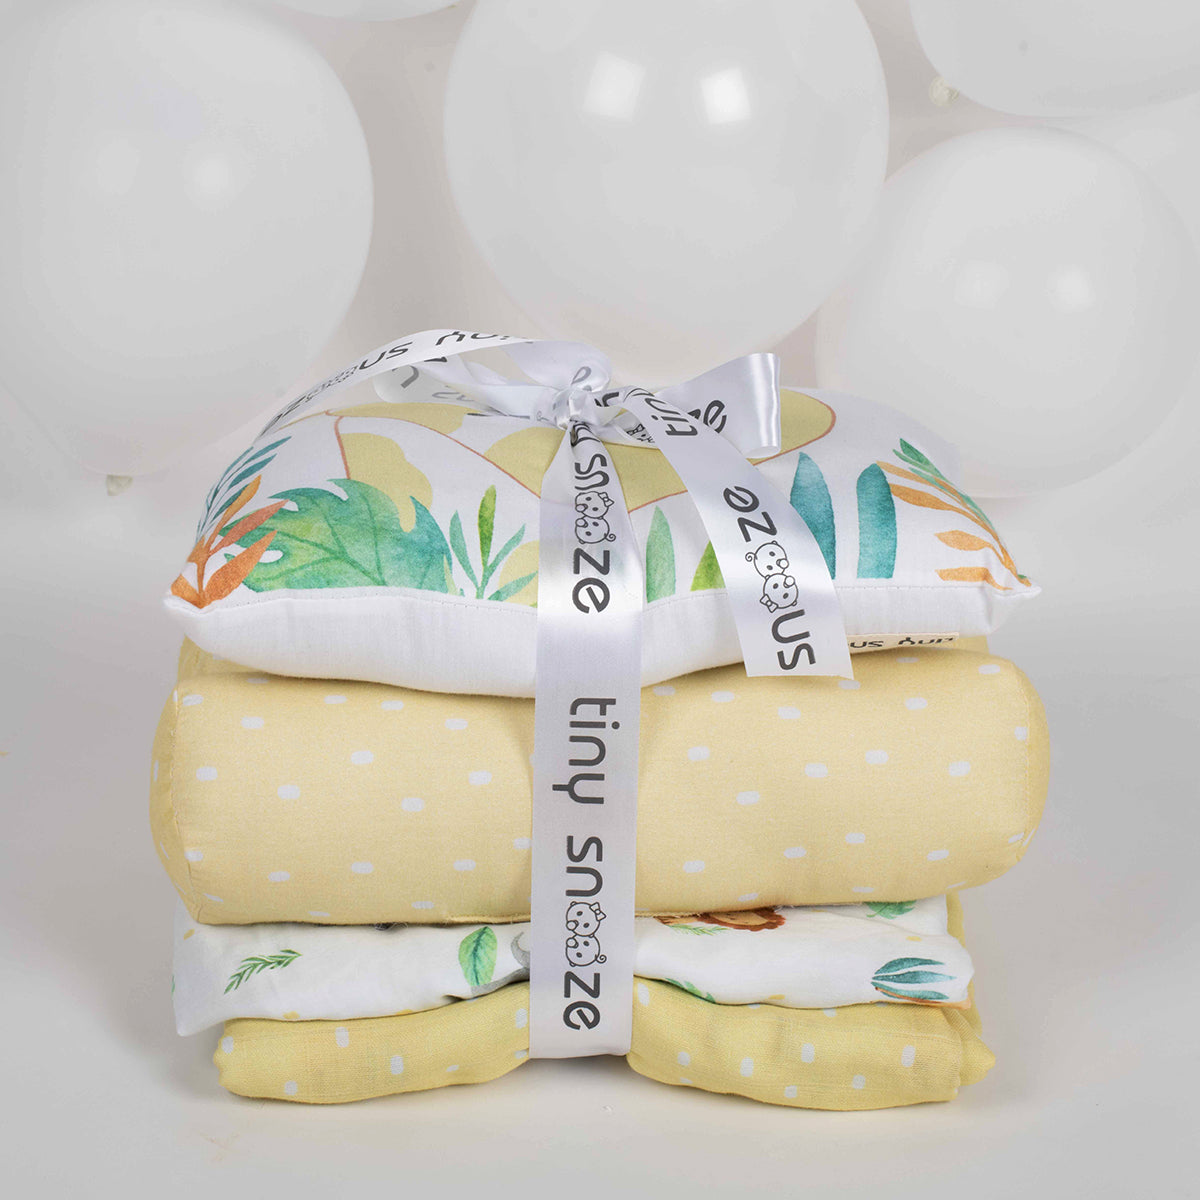 Tiny snooze first year gift set- into the wild